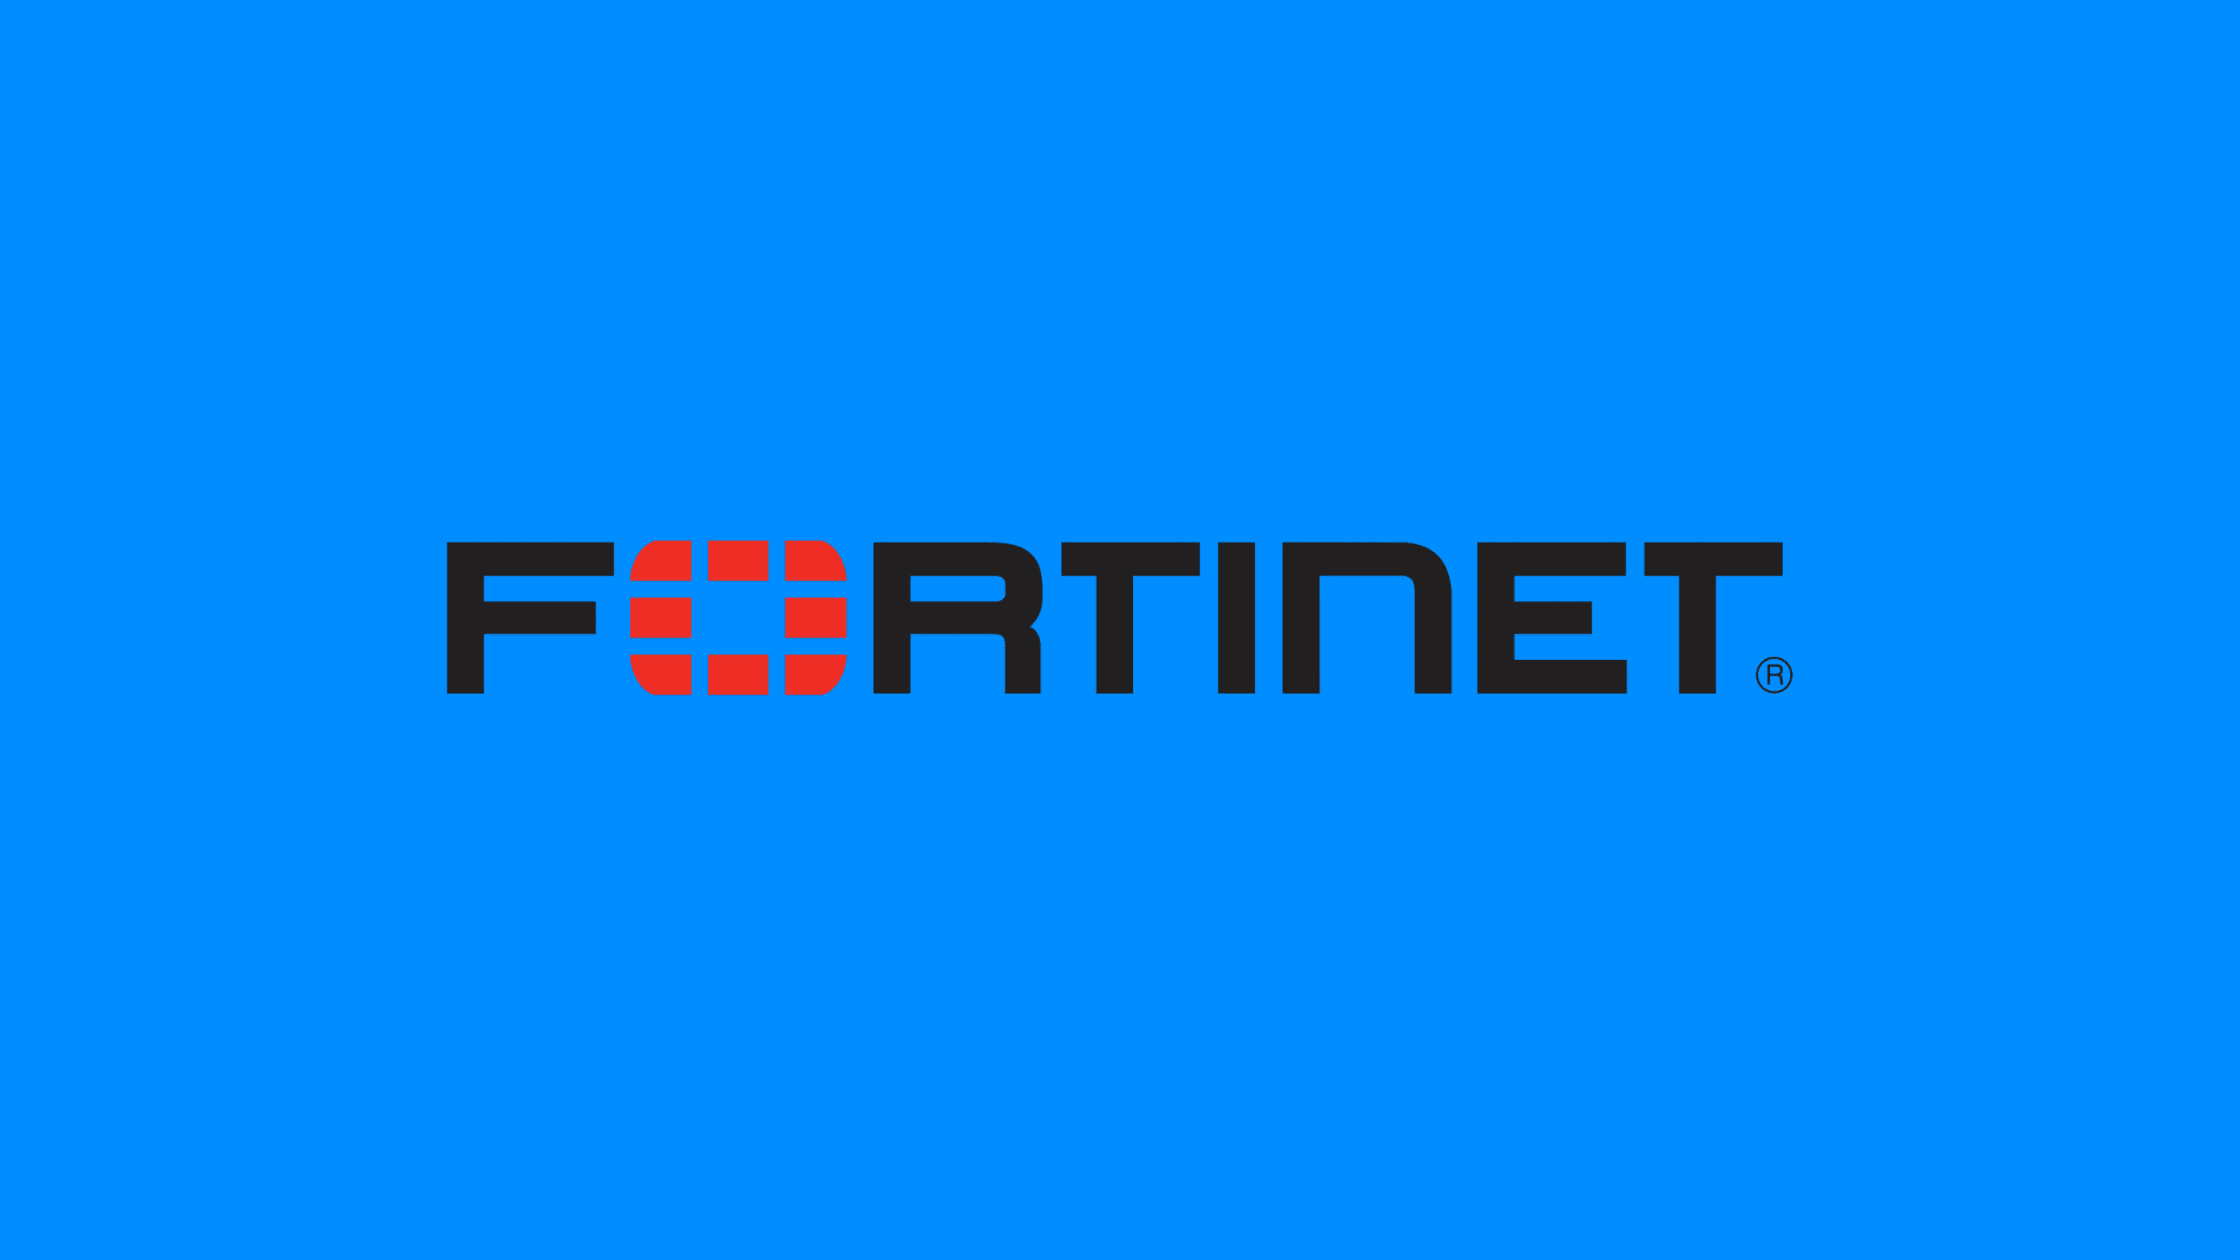 How To Fix The New Security Bypass Vulnerabilities In Fortinet Products